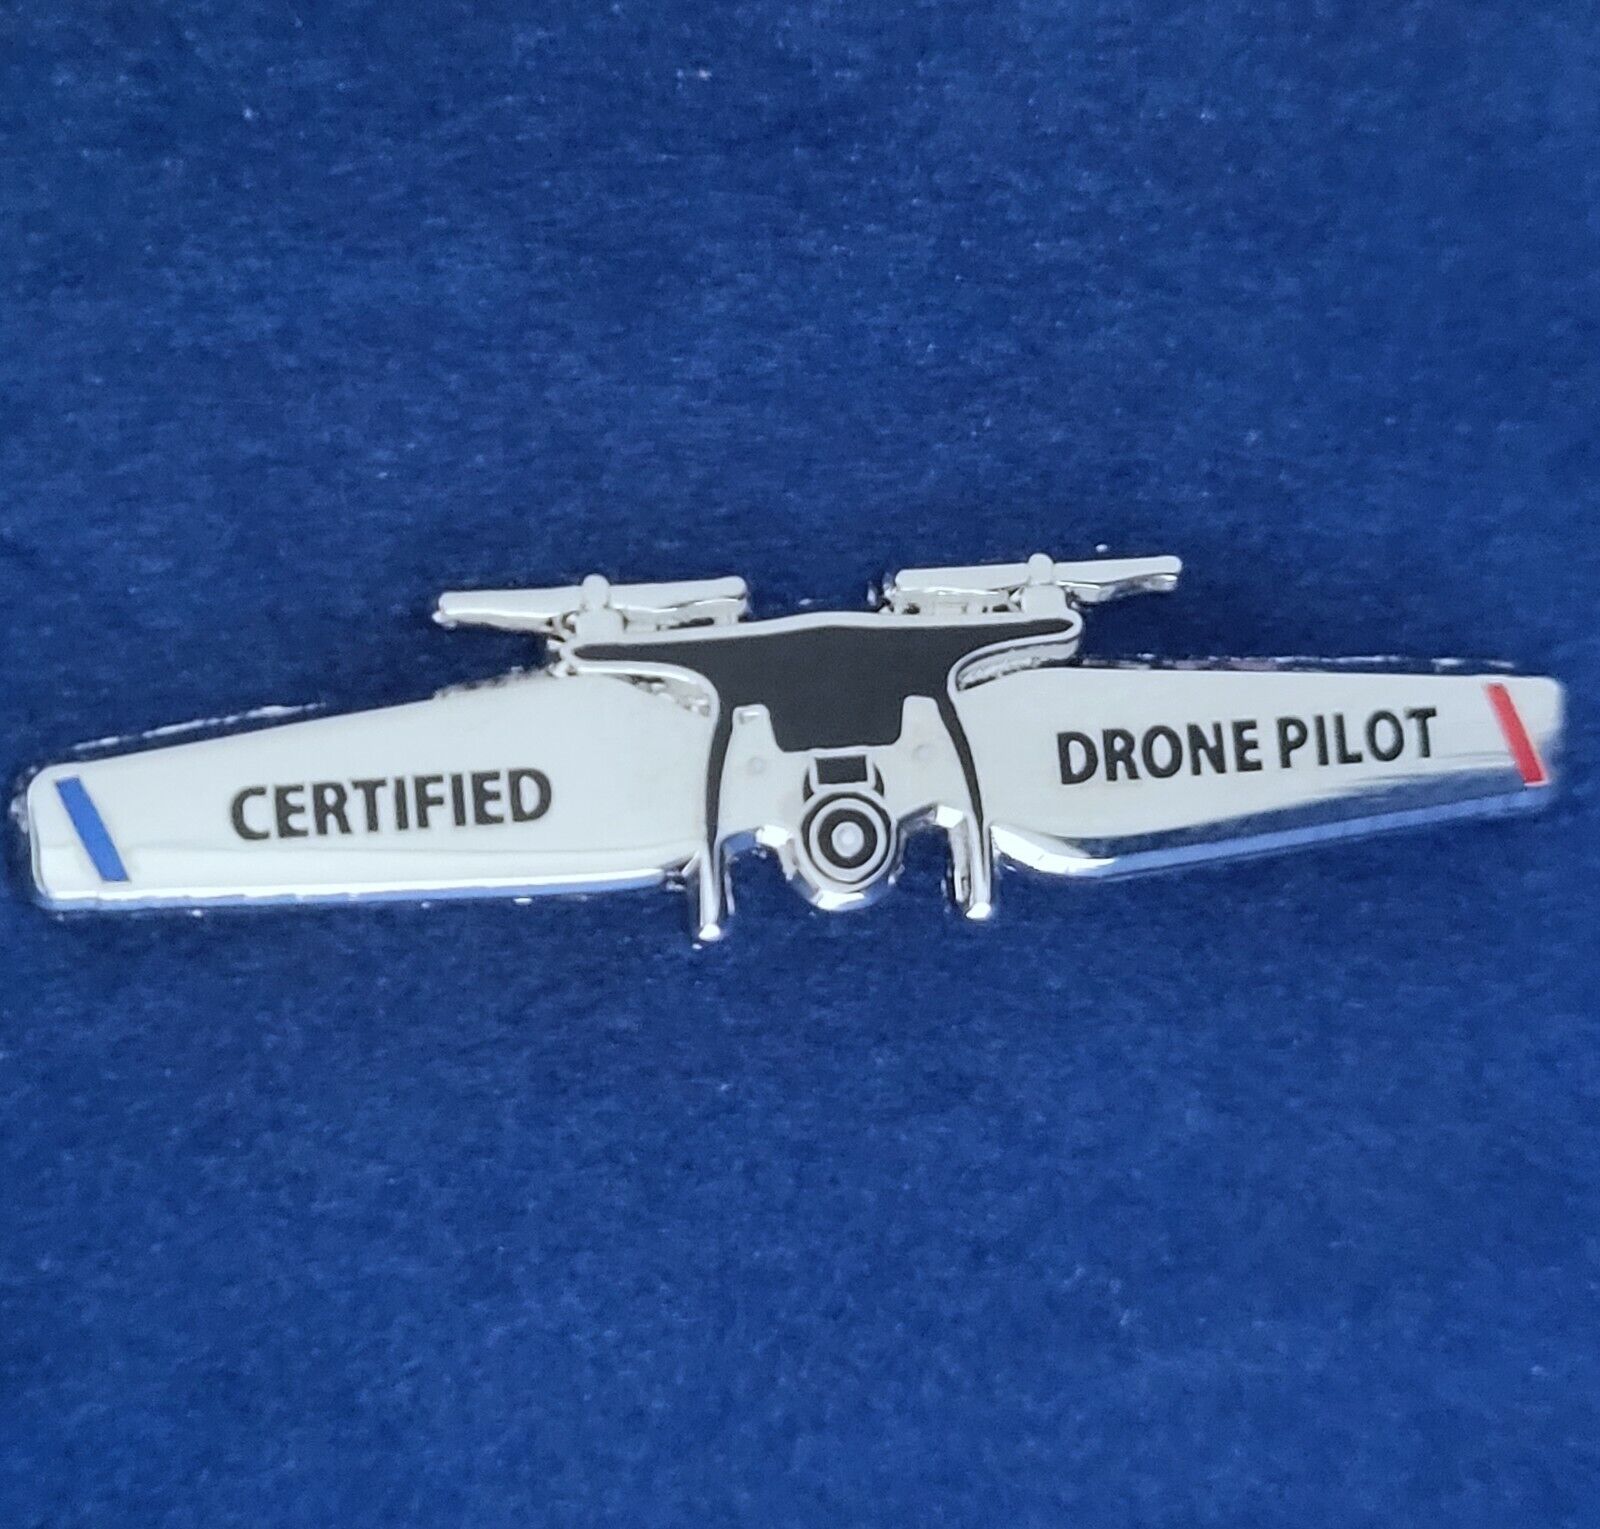 CERTIFIED DRONE PILOT BLADE WING PIN, Item #1501: Silver color plated finish